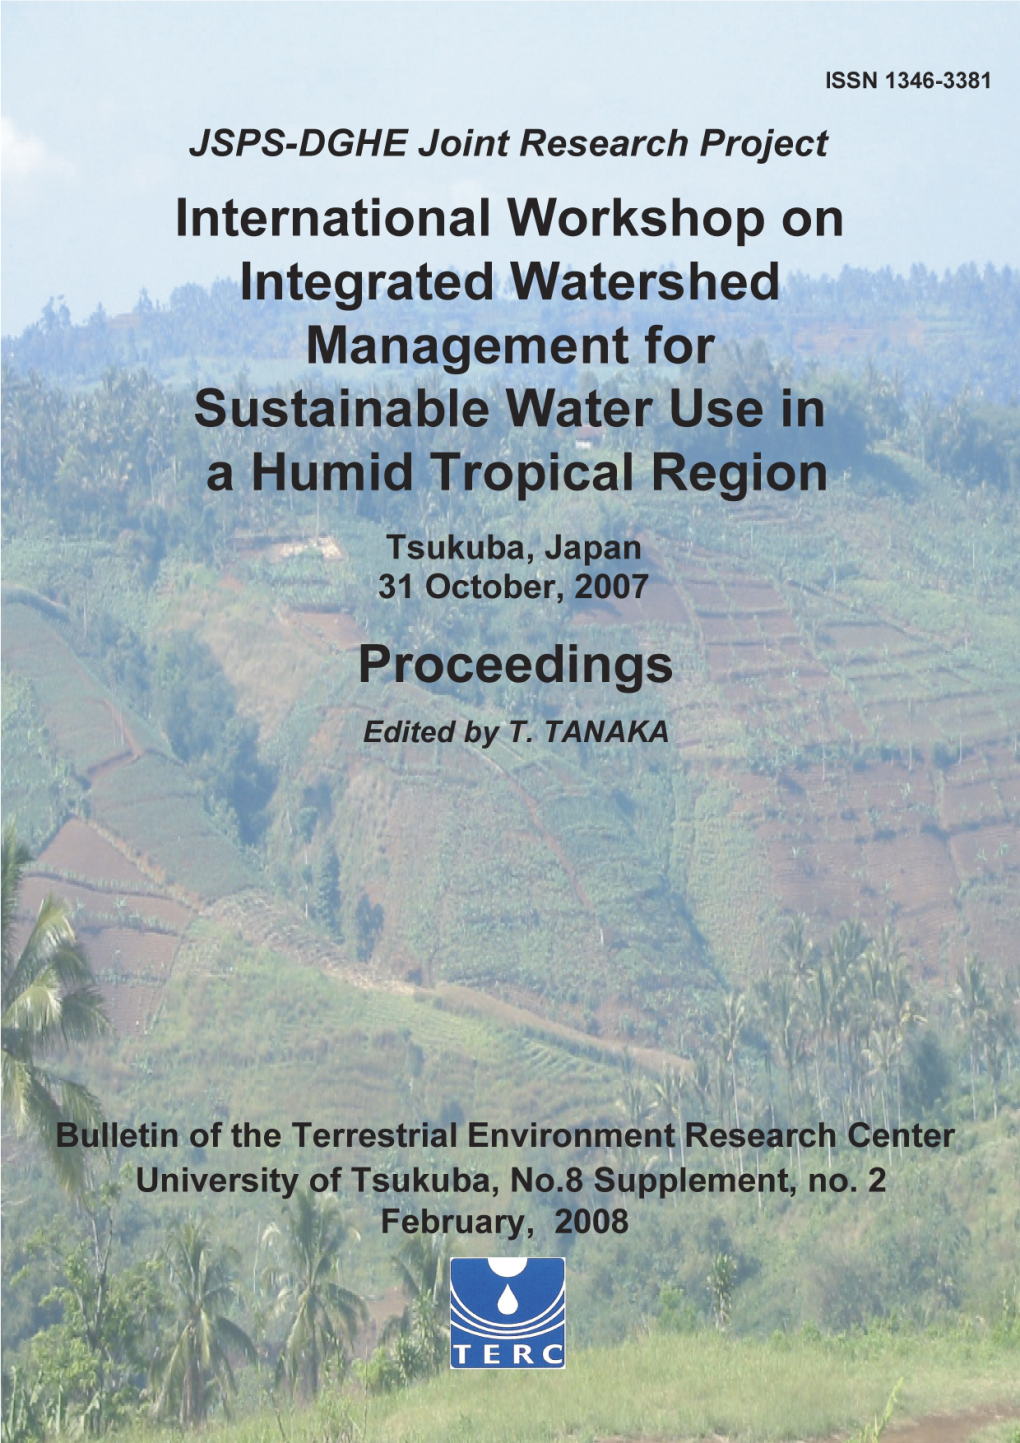 JSPS-DGHE Joint Research Project International Workshop on Integrated Watershed